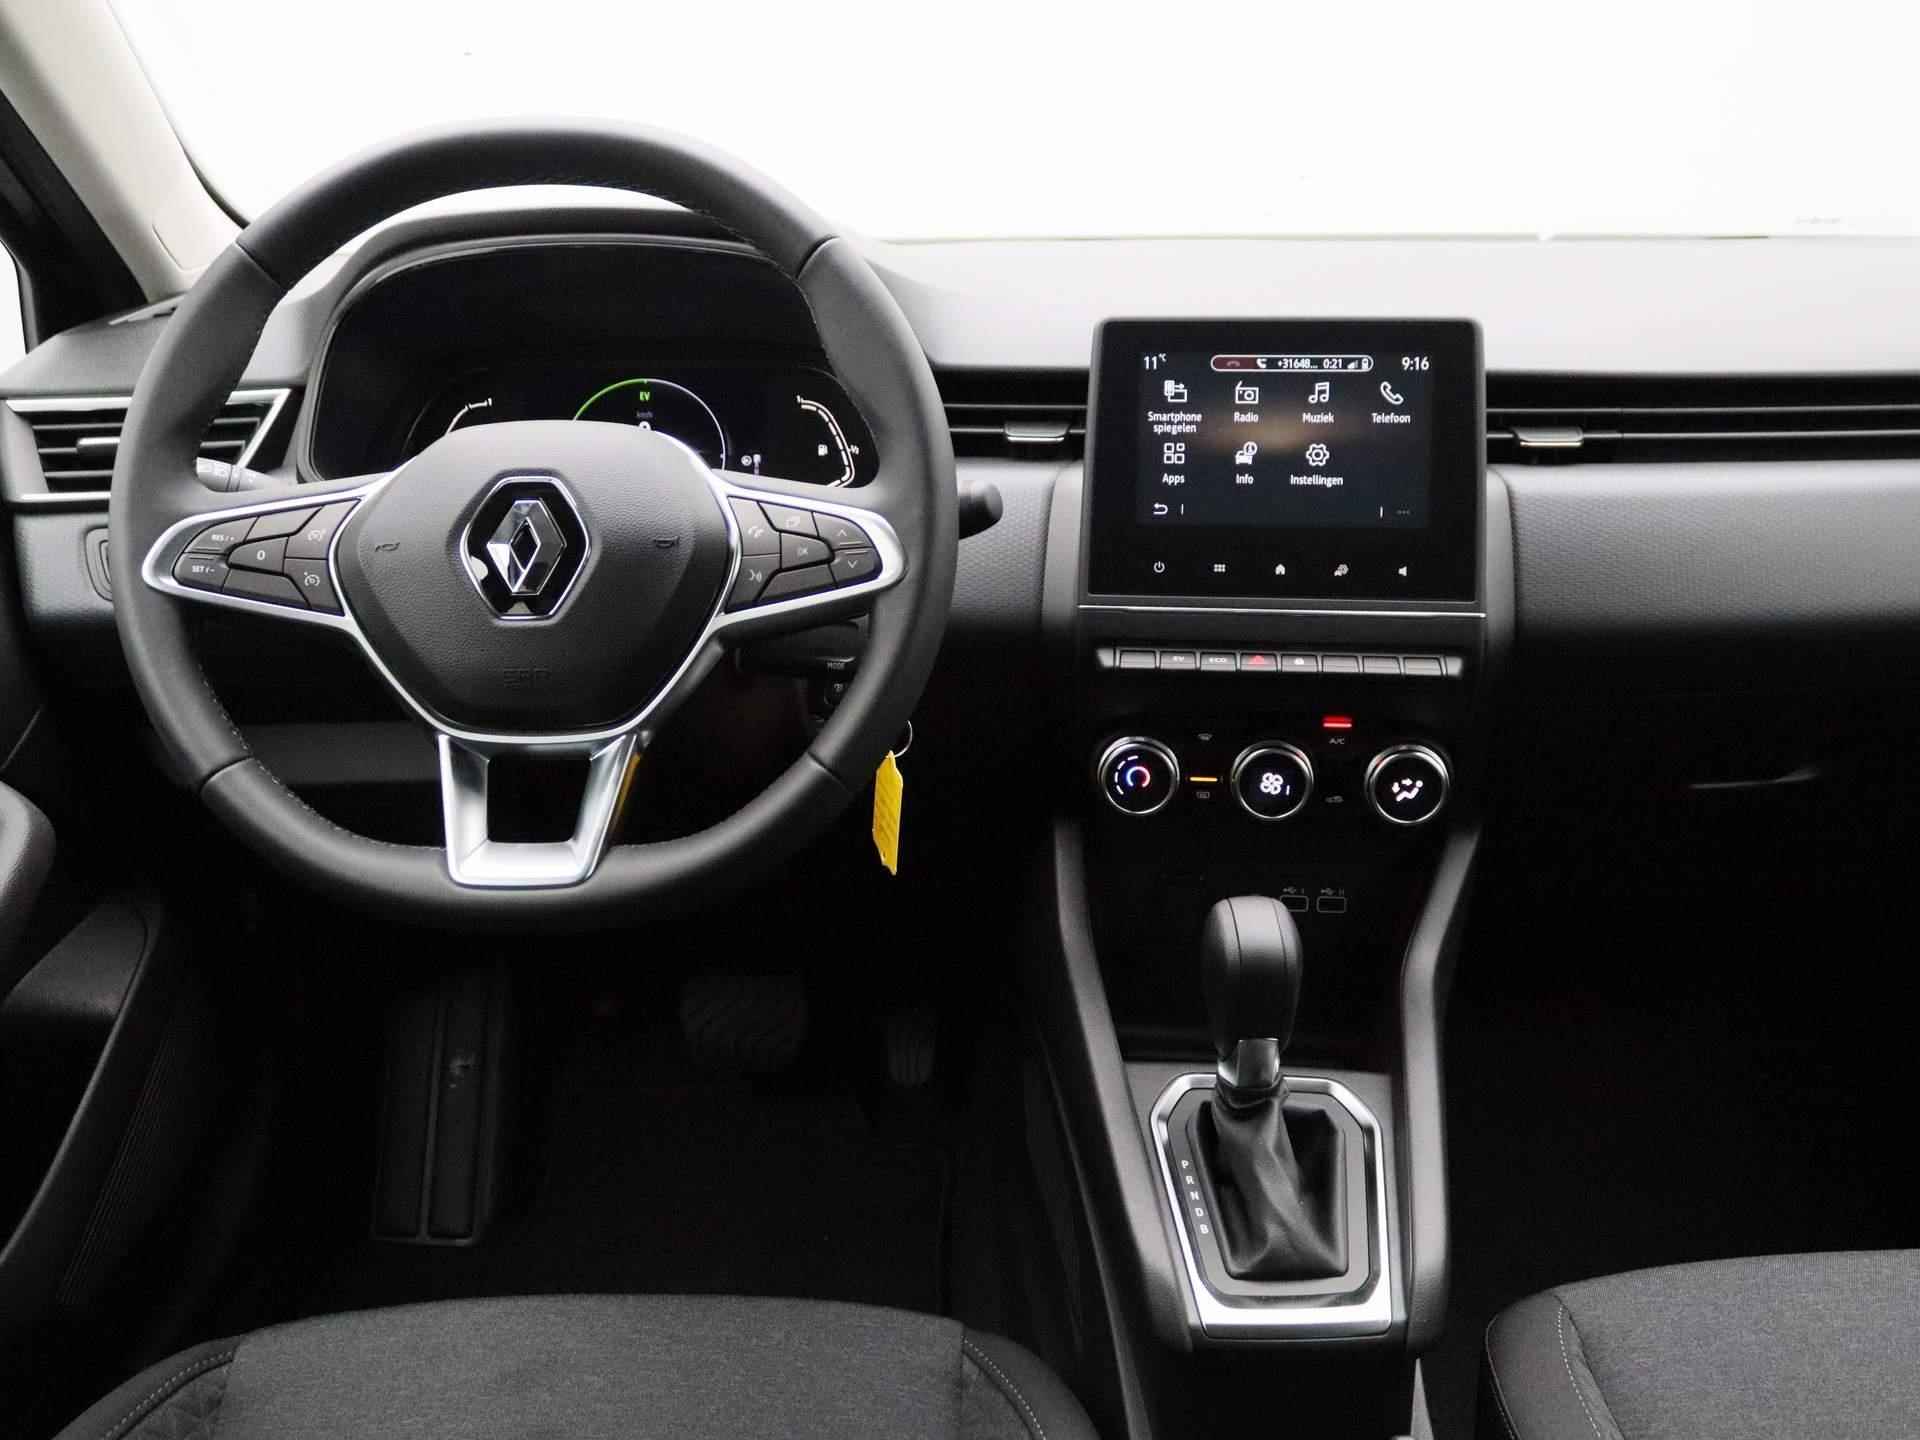 Renault Clio 1.6 E-Tech Full Hybrid 145 Equilibre | PDC Achter | Airconditioning | Draadloze Apple Carplay & Android Auto | Cruise Control | Licht- en regensensor - 7/36